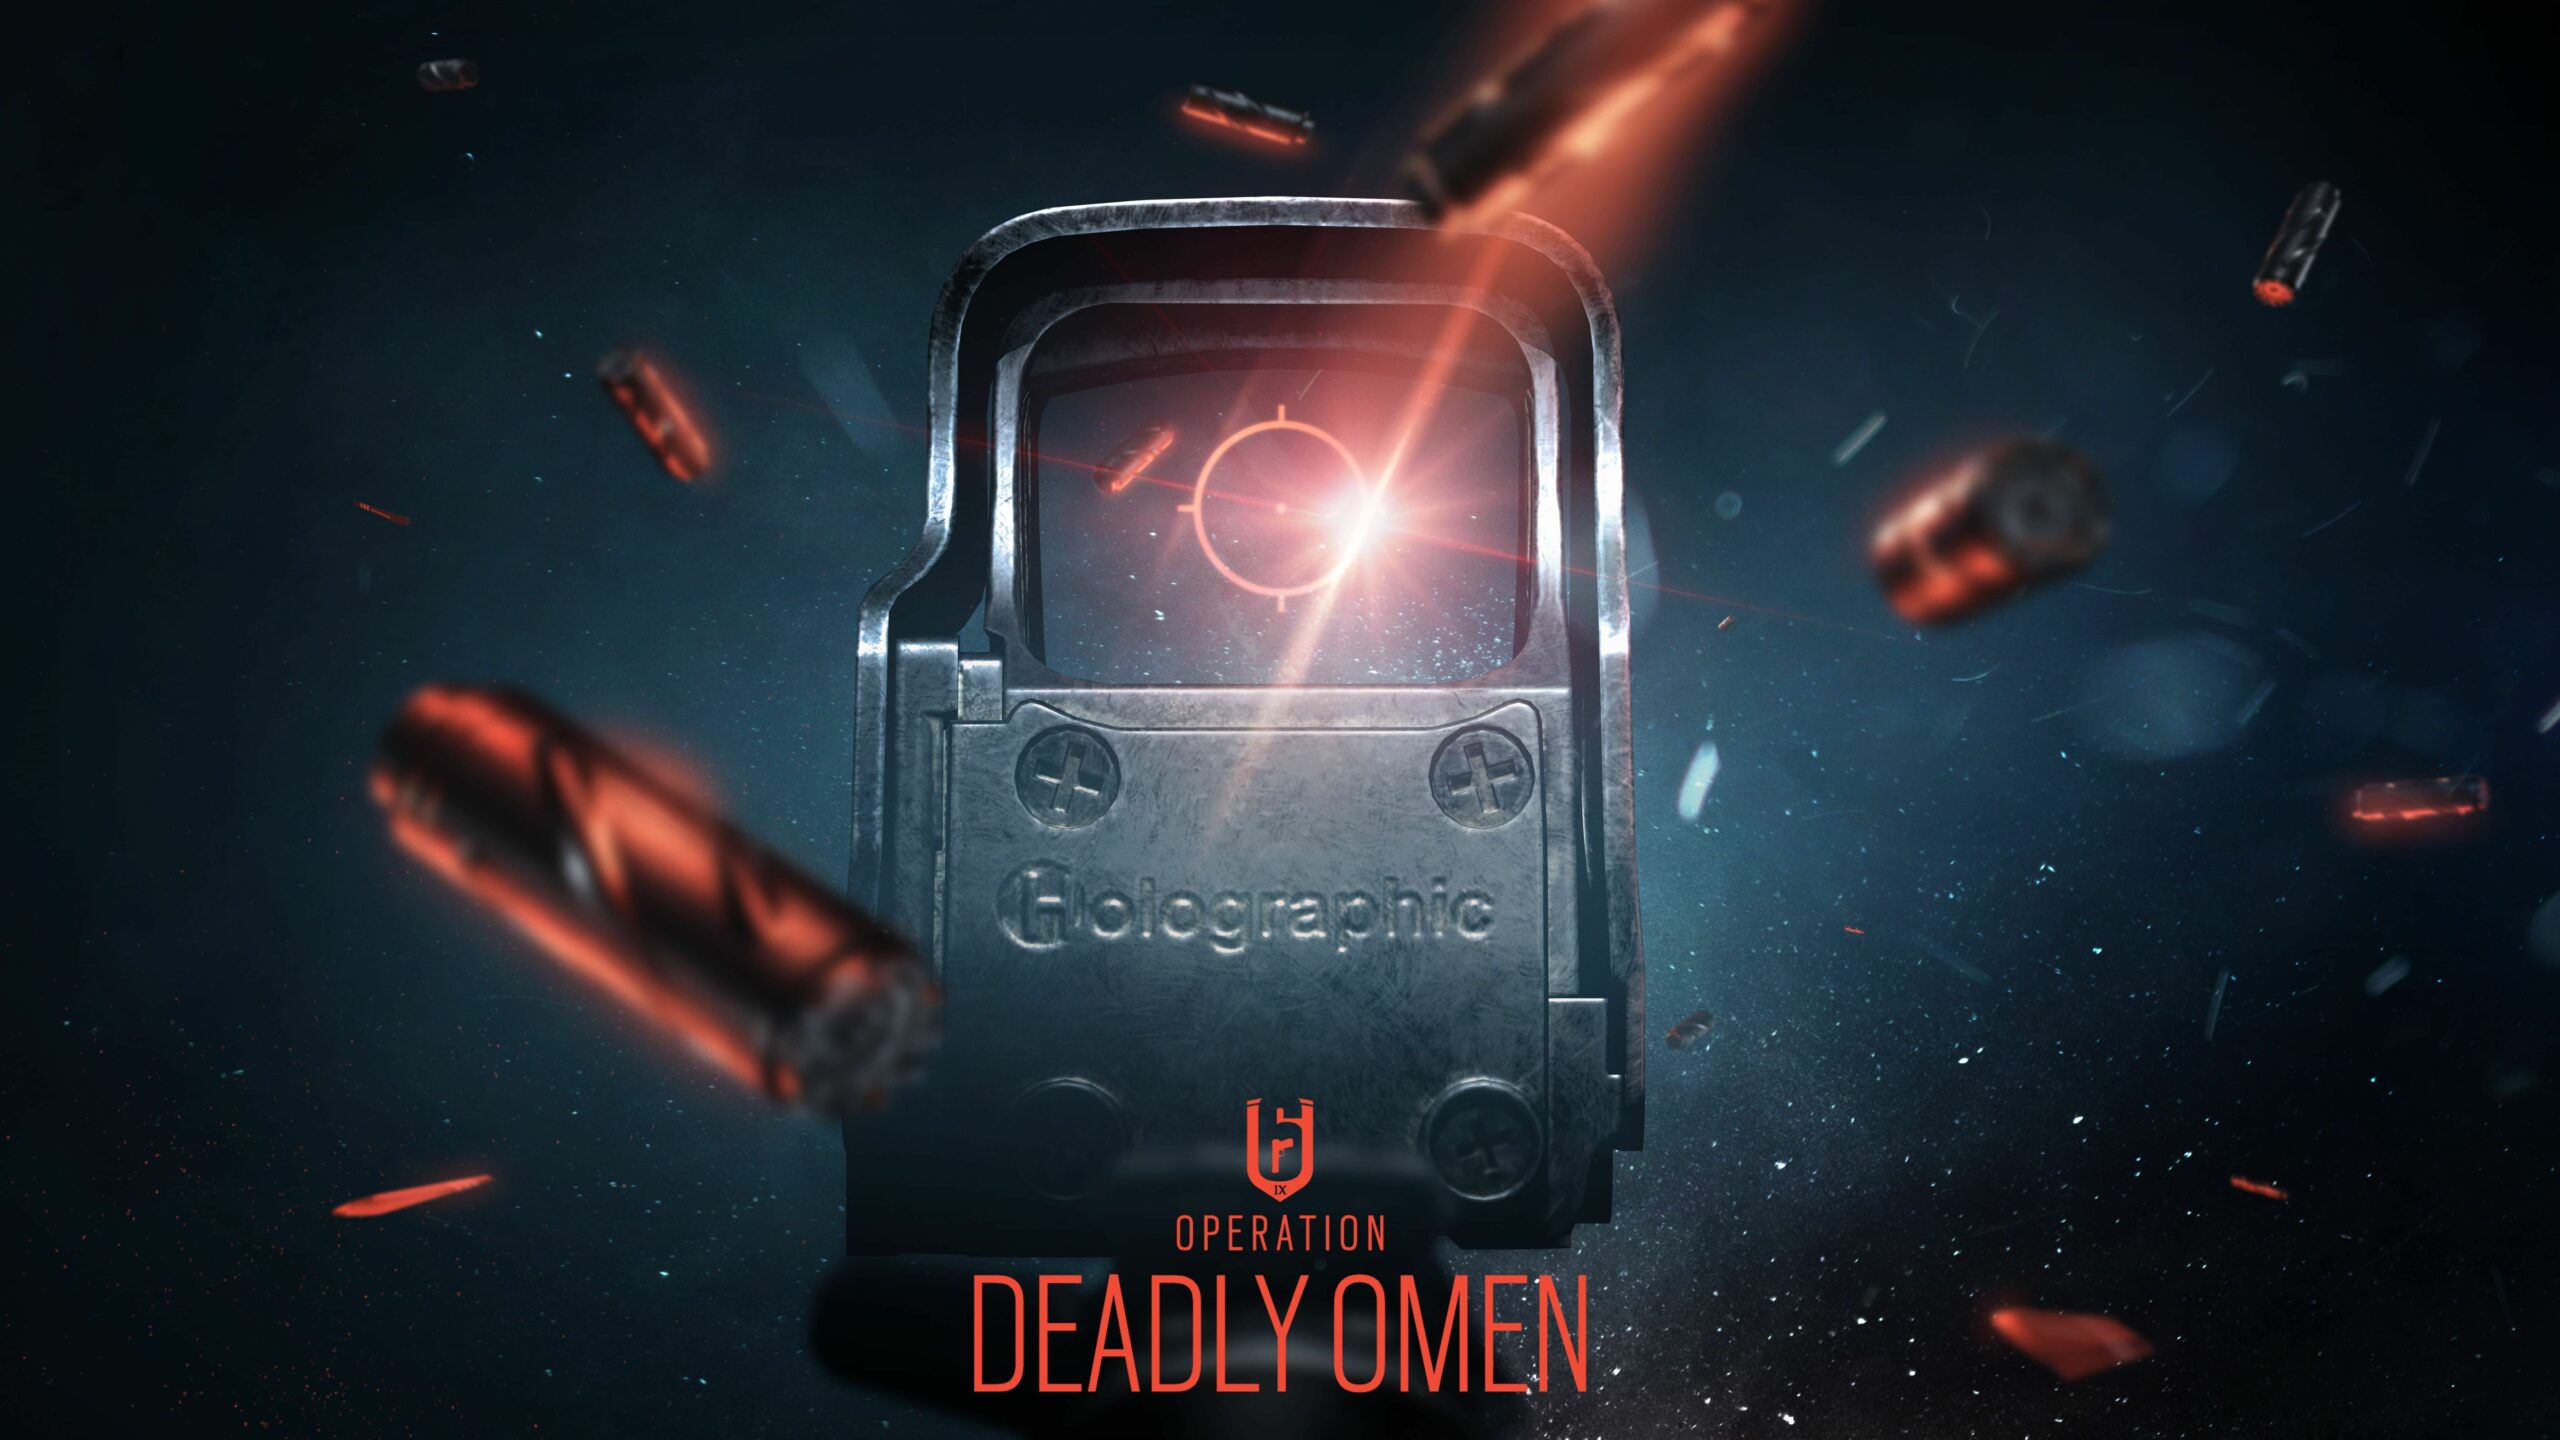 Operation Deadly Omen: Deimos is Siege’s new operator, new Anti Cheat update, shield rework, Azami nerf, R4C gets ACOG back, and more!